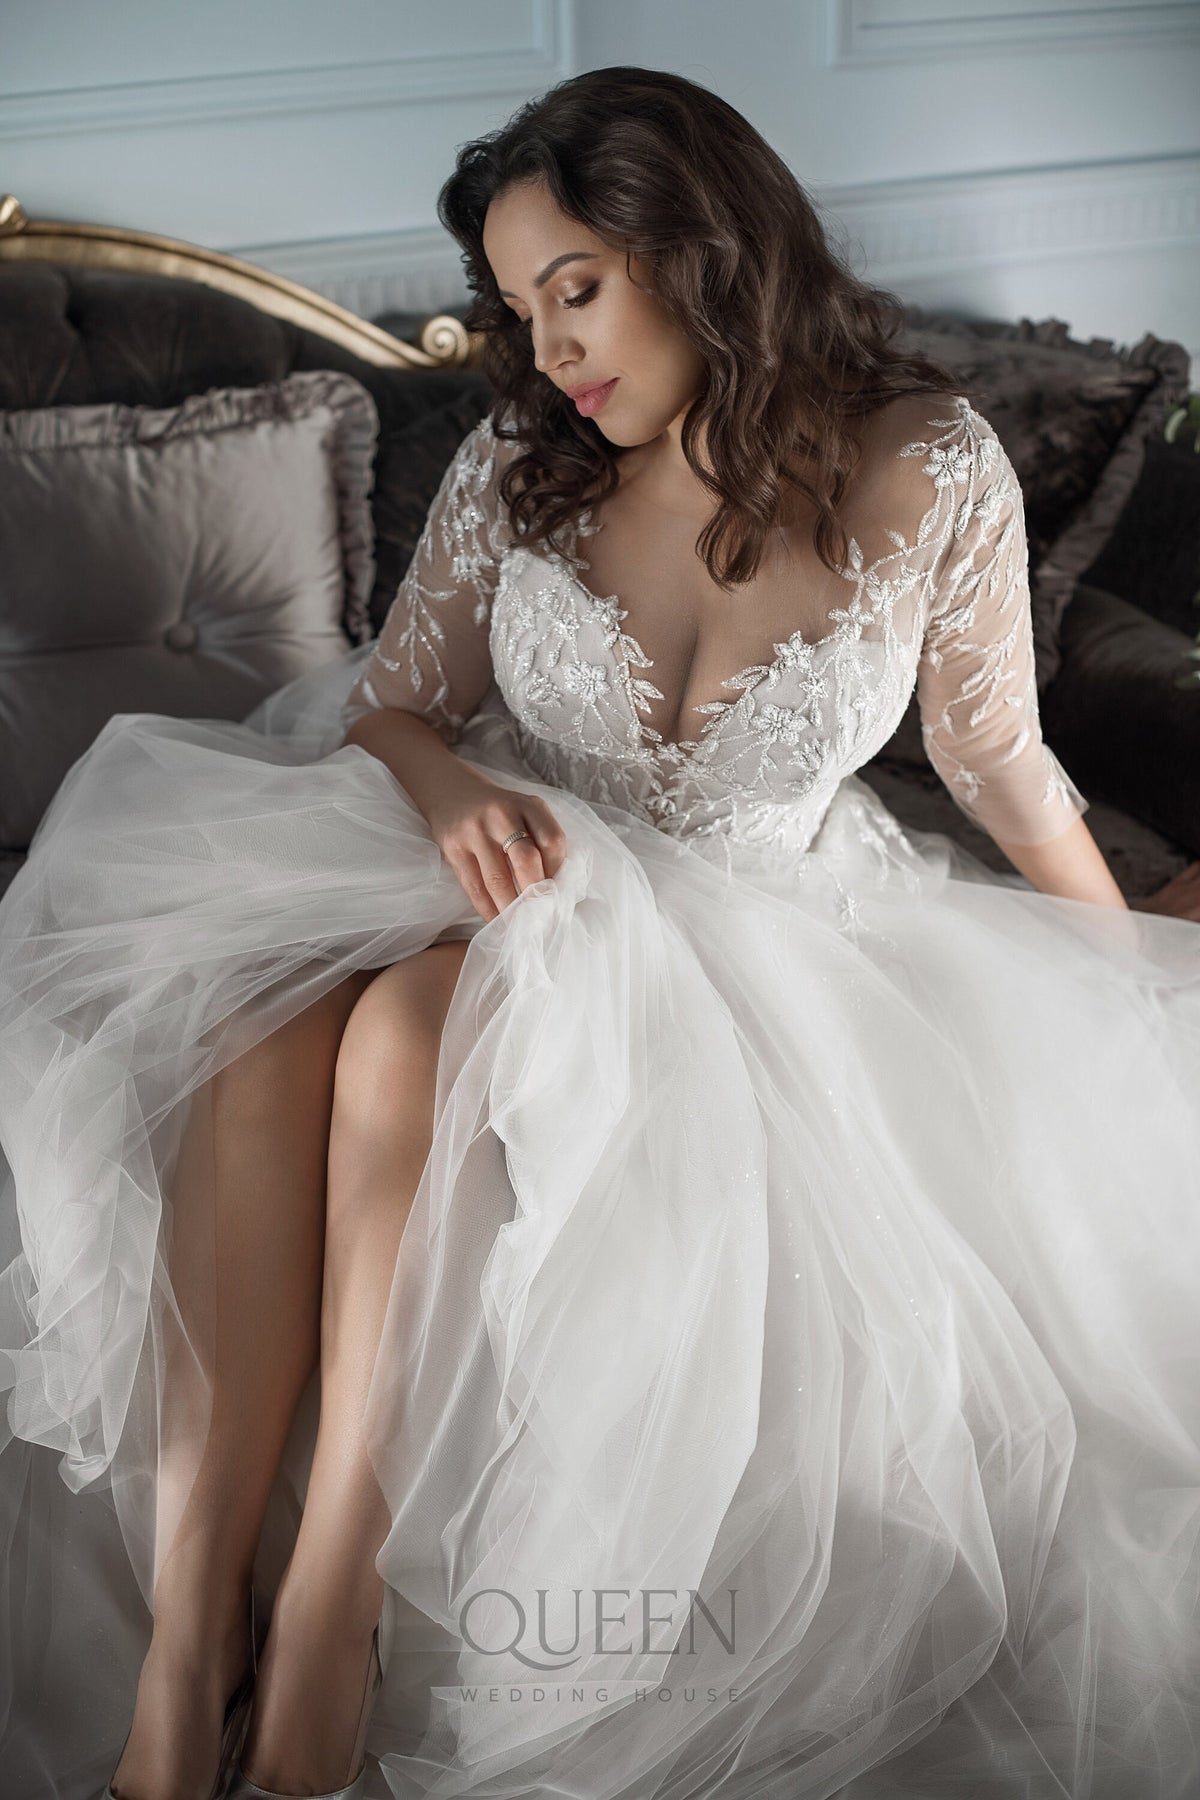 Beautiful ALine 3/4 Sleeve Plunge Neckline Sparkle Floral Lace Wedding Dress Bridal Gown Plus Size with Train and Corset